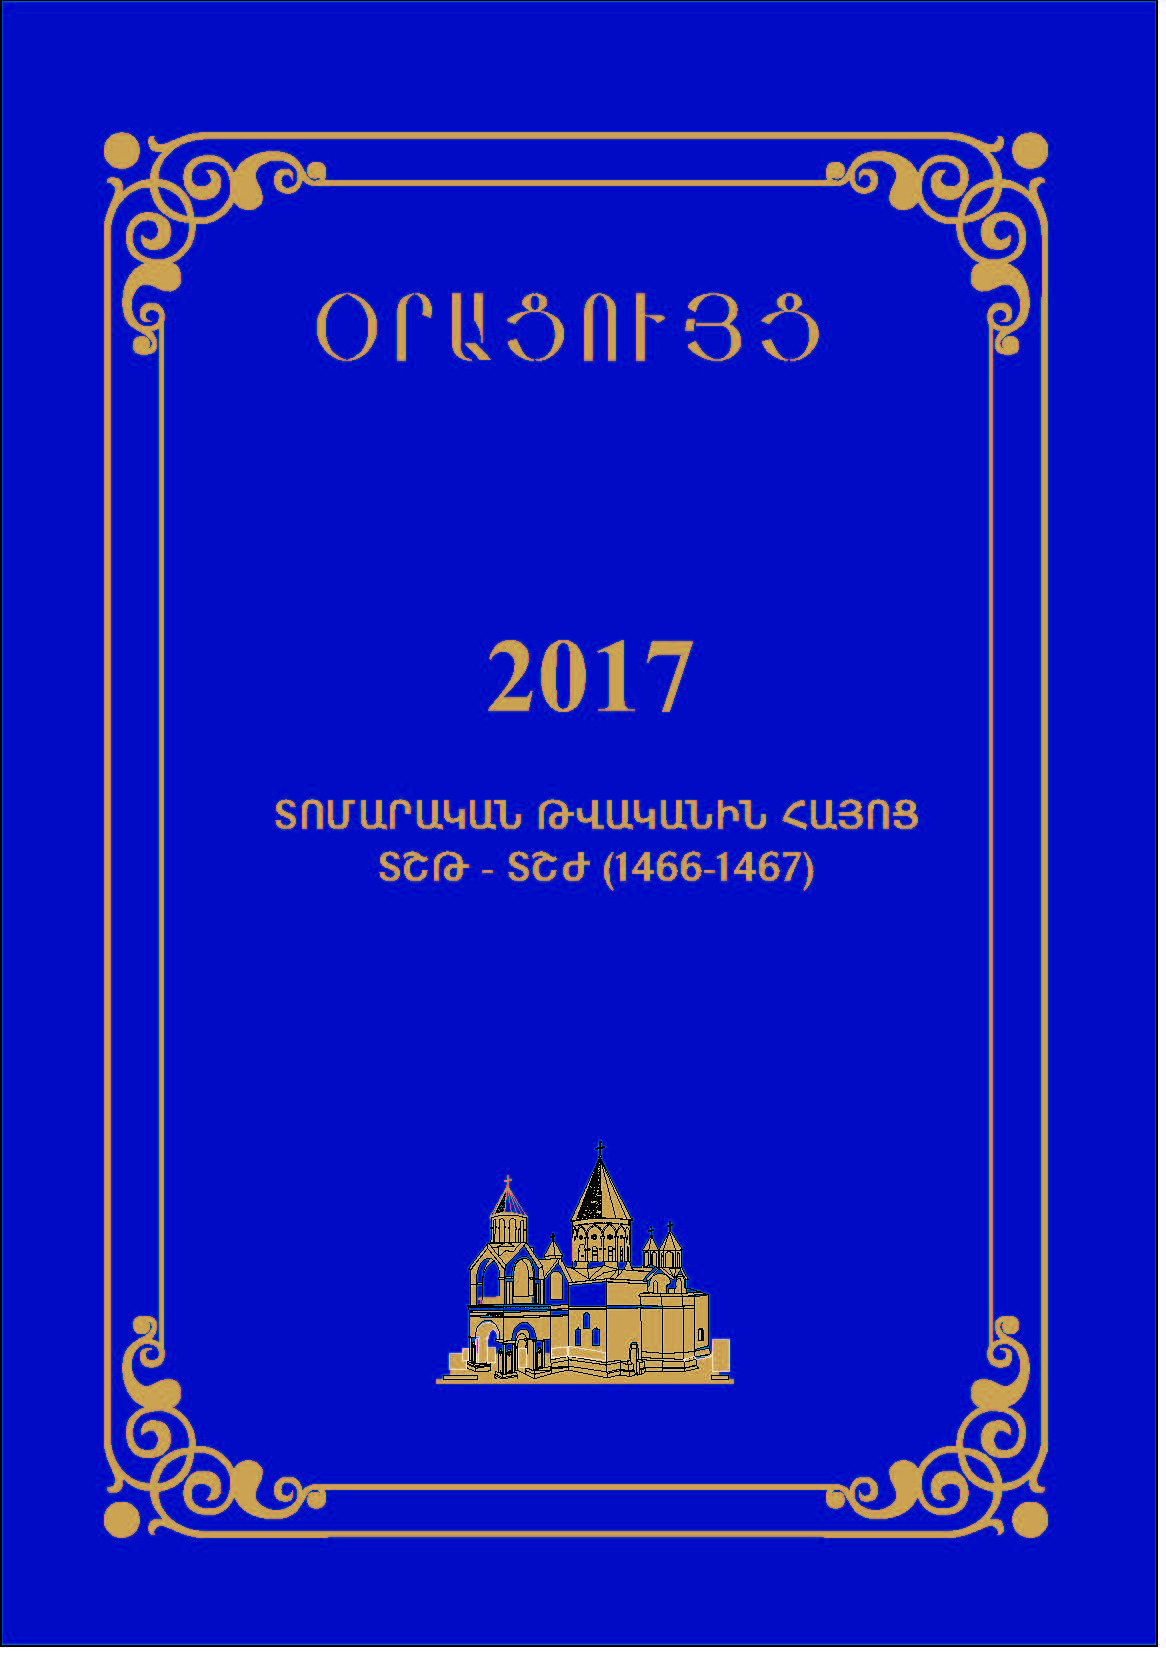 Publications on the Holy Church Fathers and the 2017 Calendar